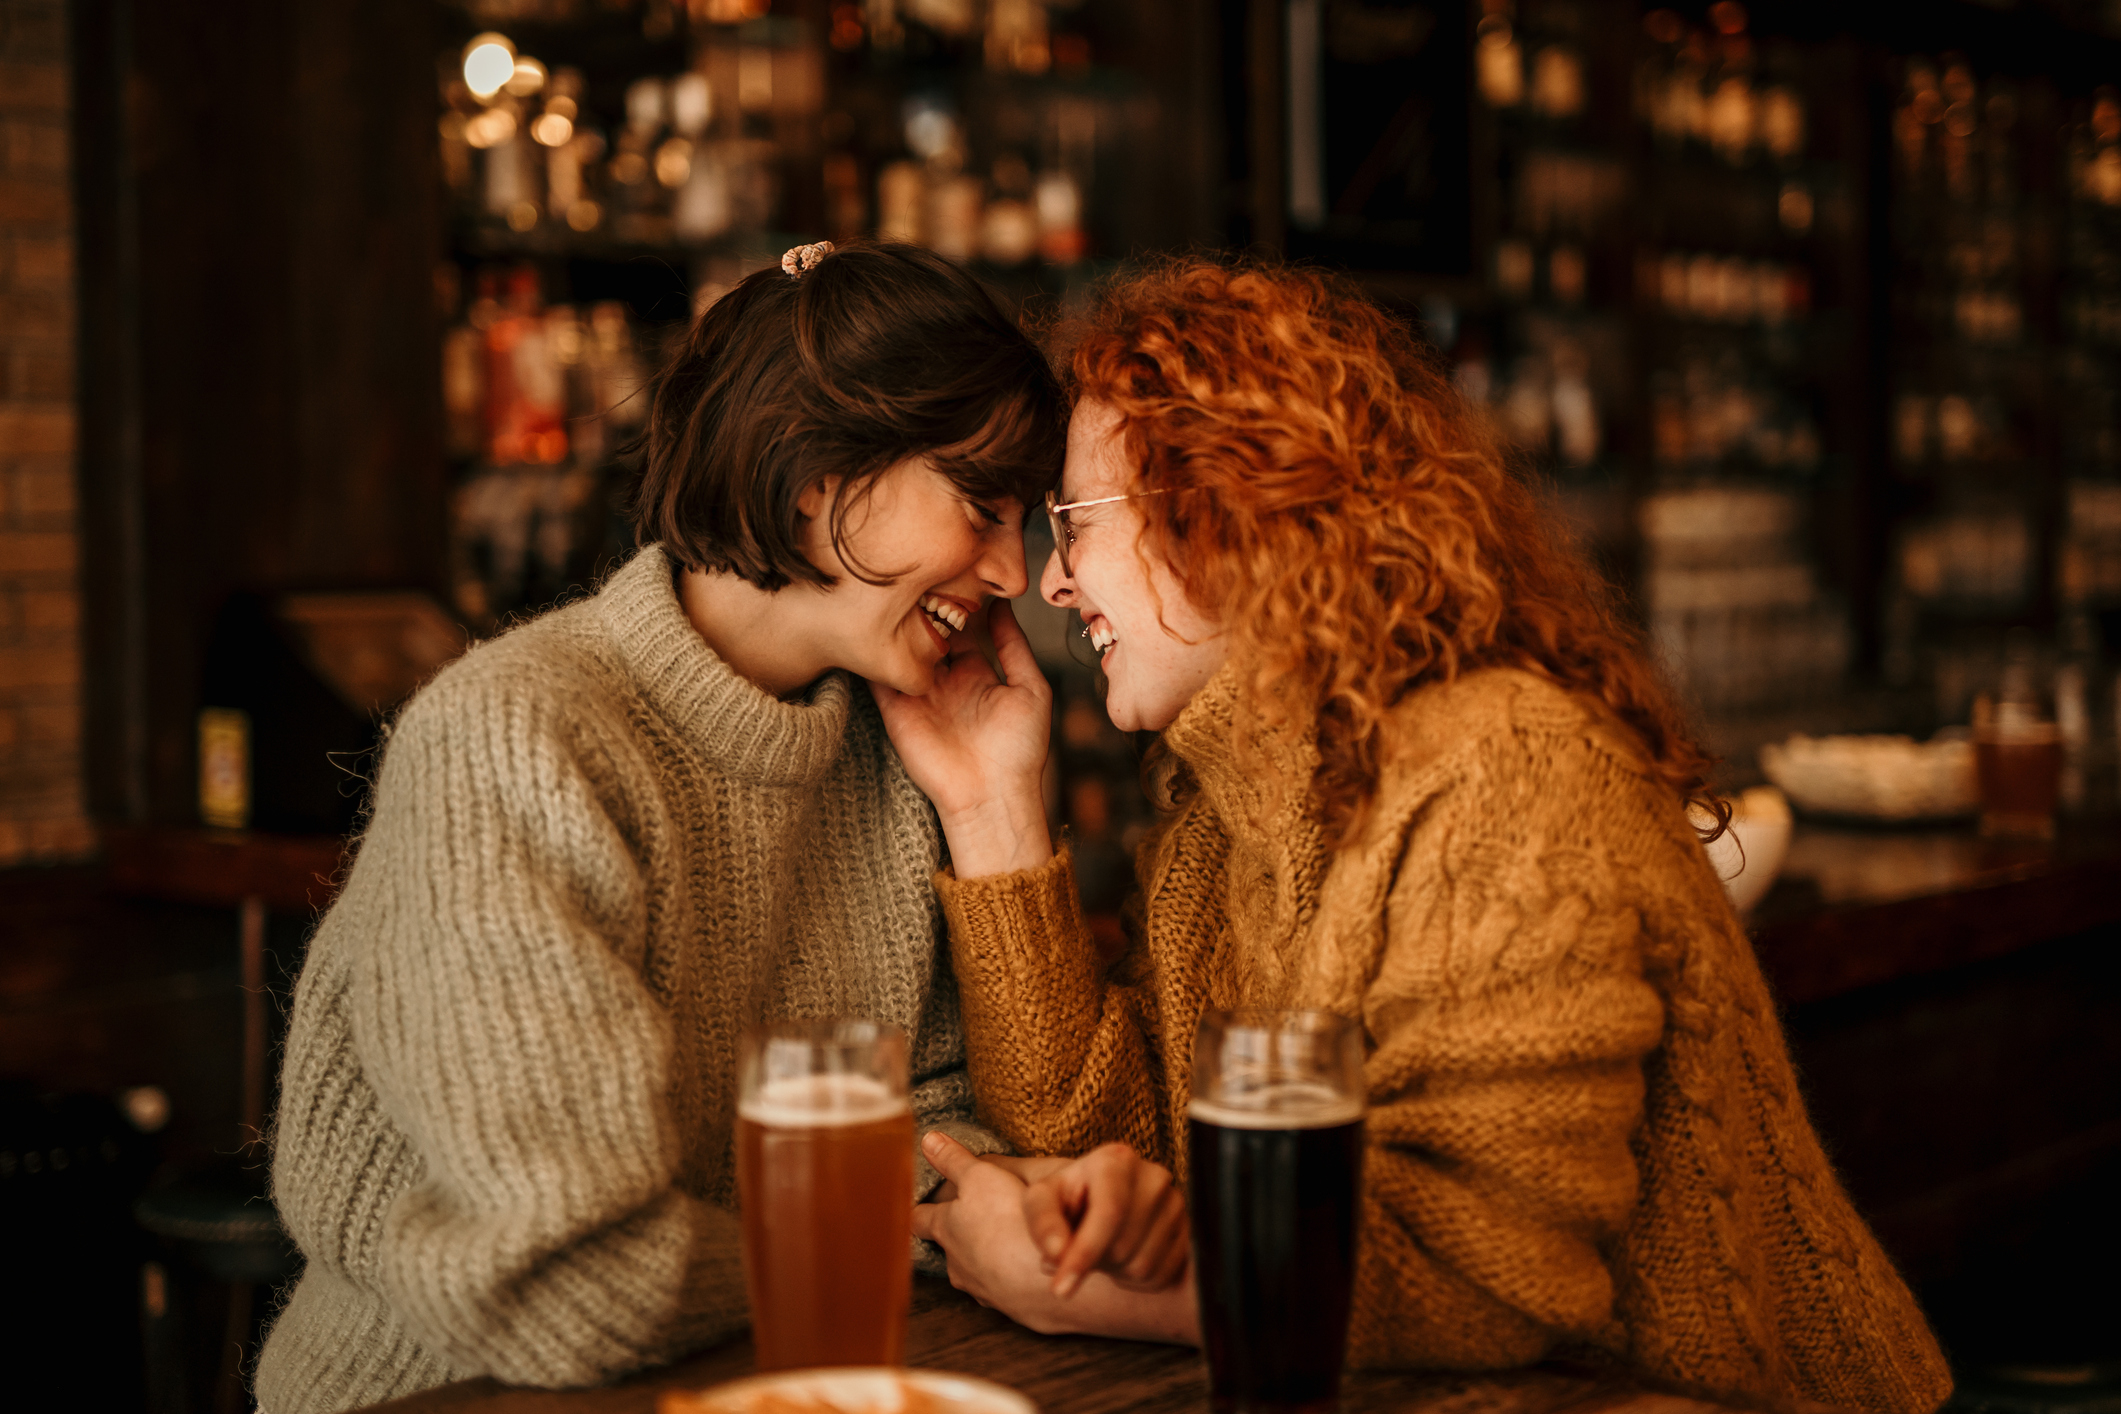 Two people romantically touching foreheads at a bar with drinks on the table